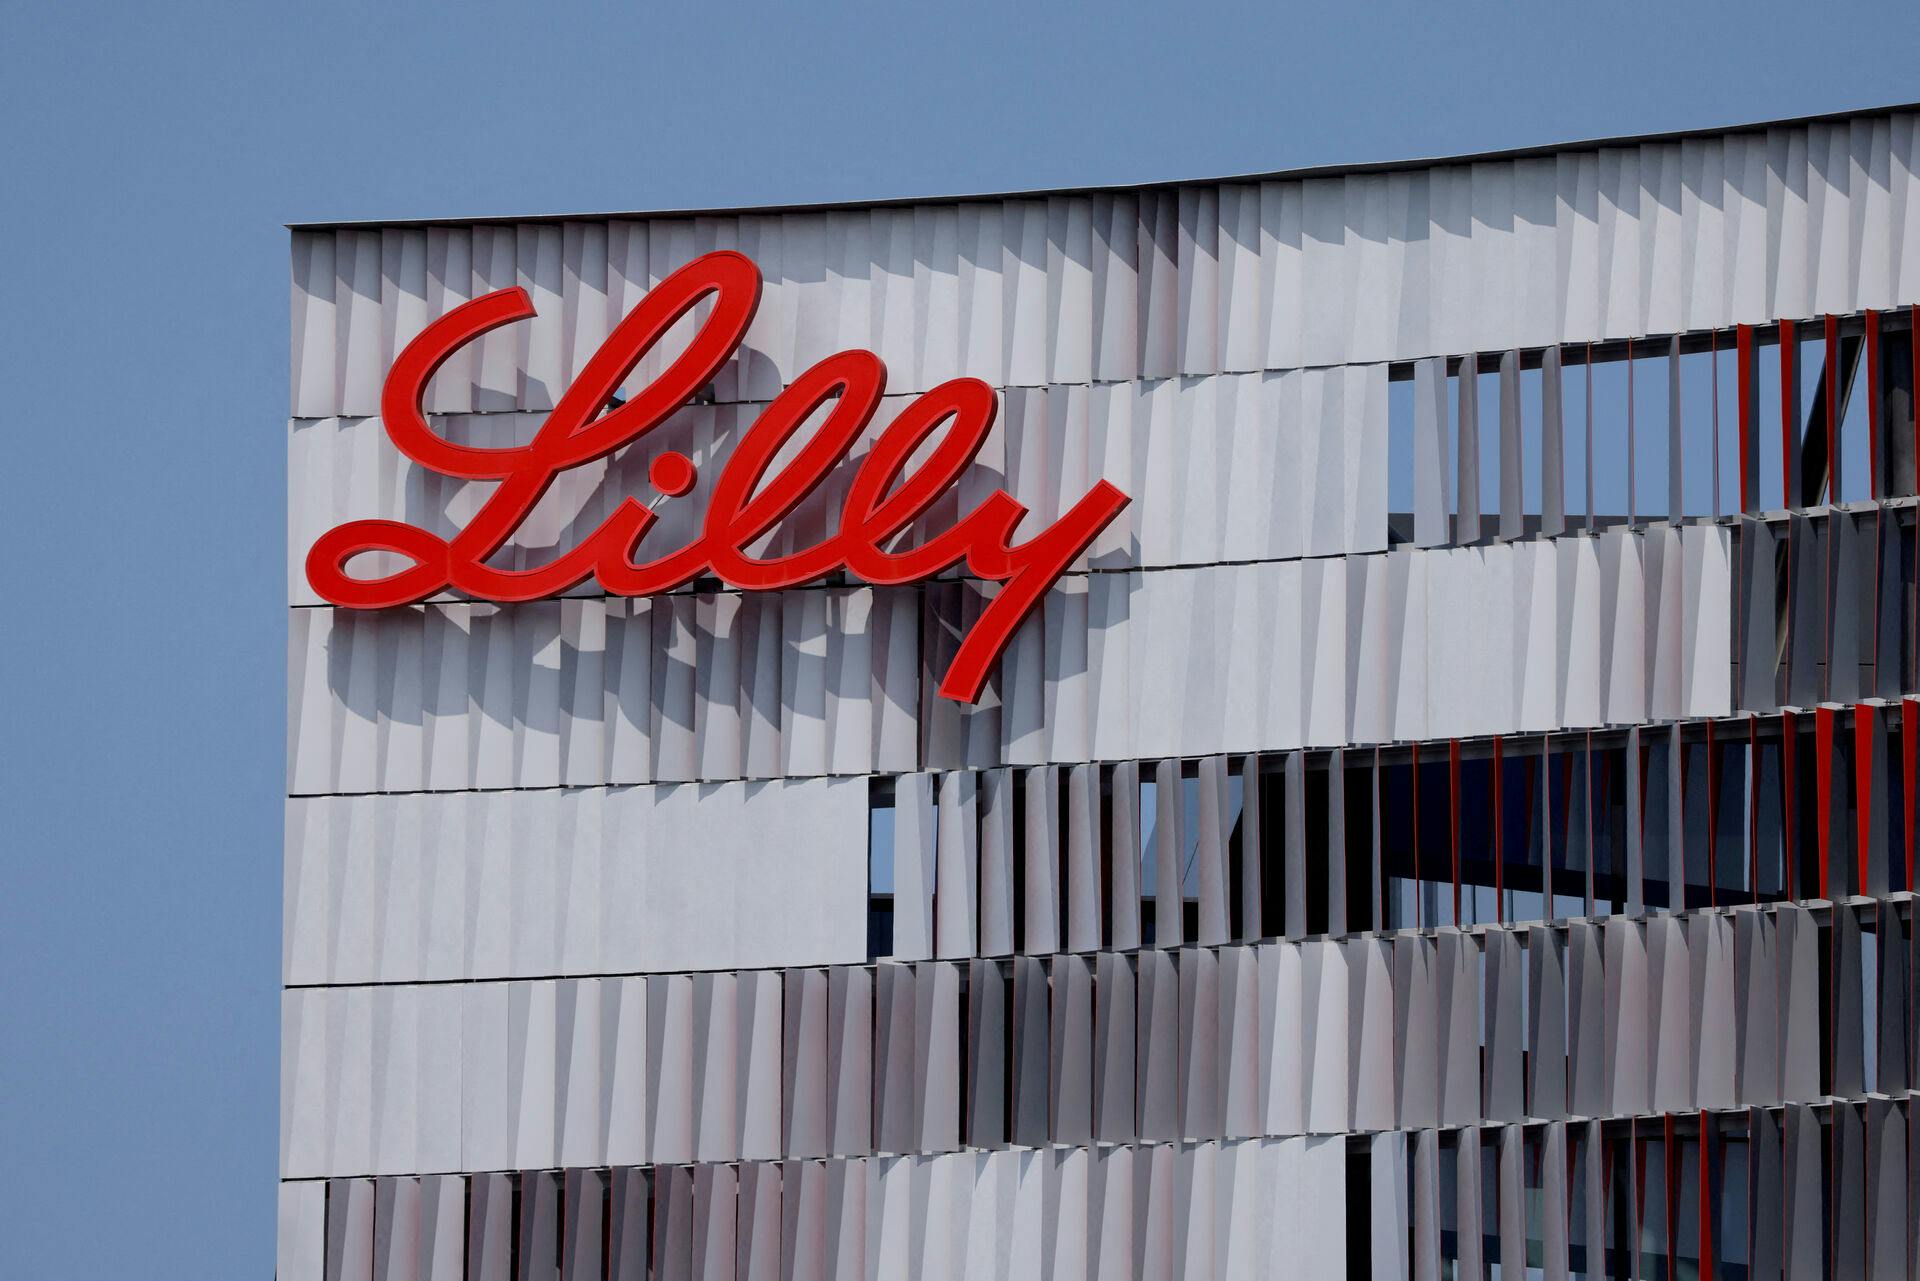 FILE PHOTO: Eli Lilly logo is shown on one of the company's offices in San Diego, California, U.S., September 17, 2020. REUTERS/Mike Blake/File Photo